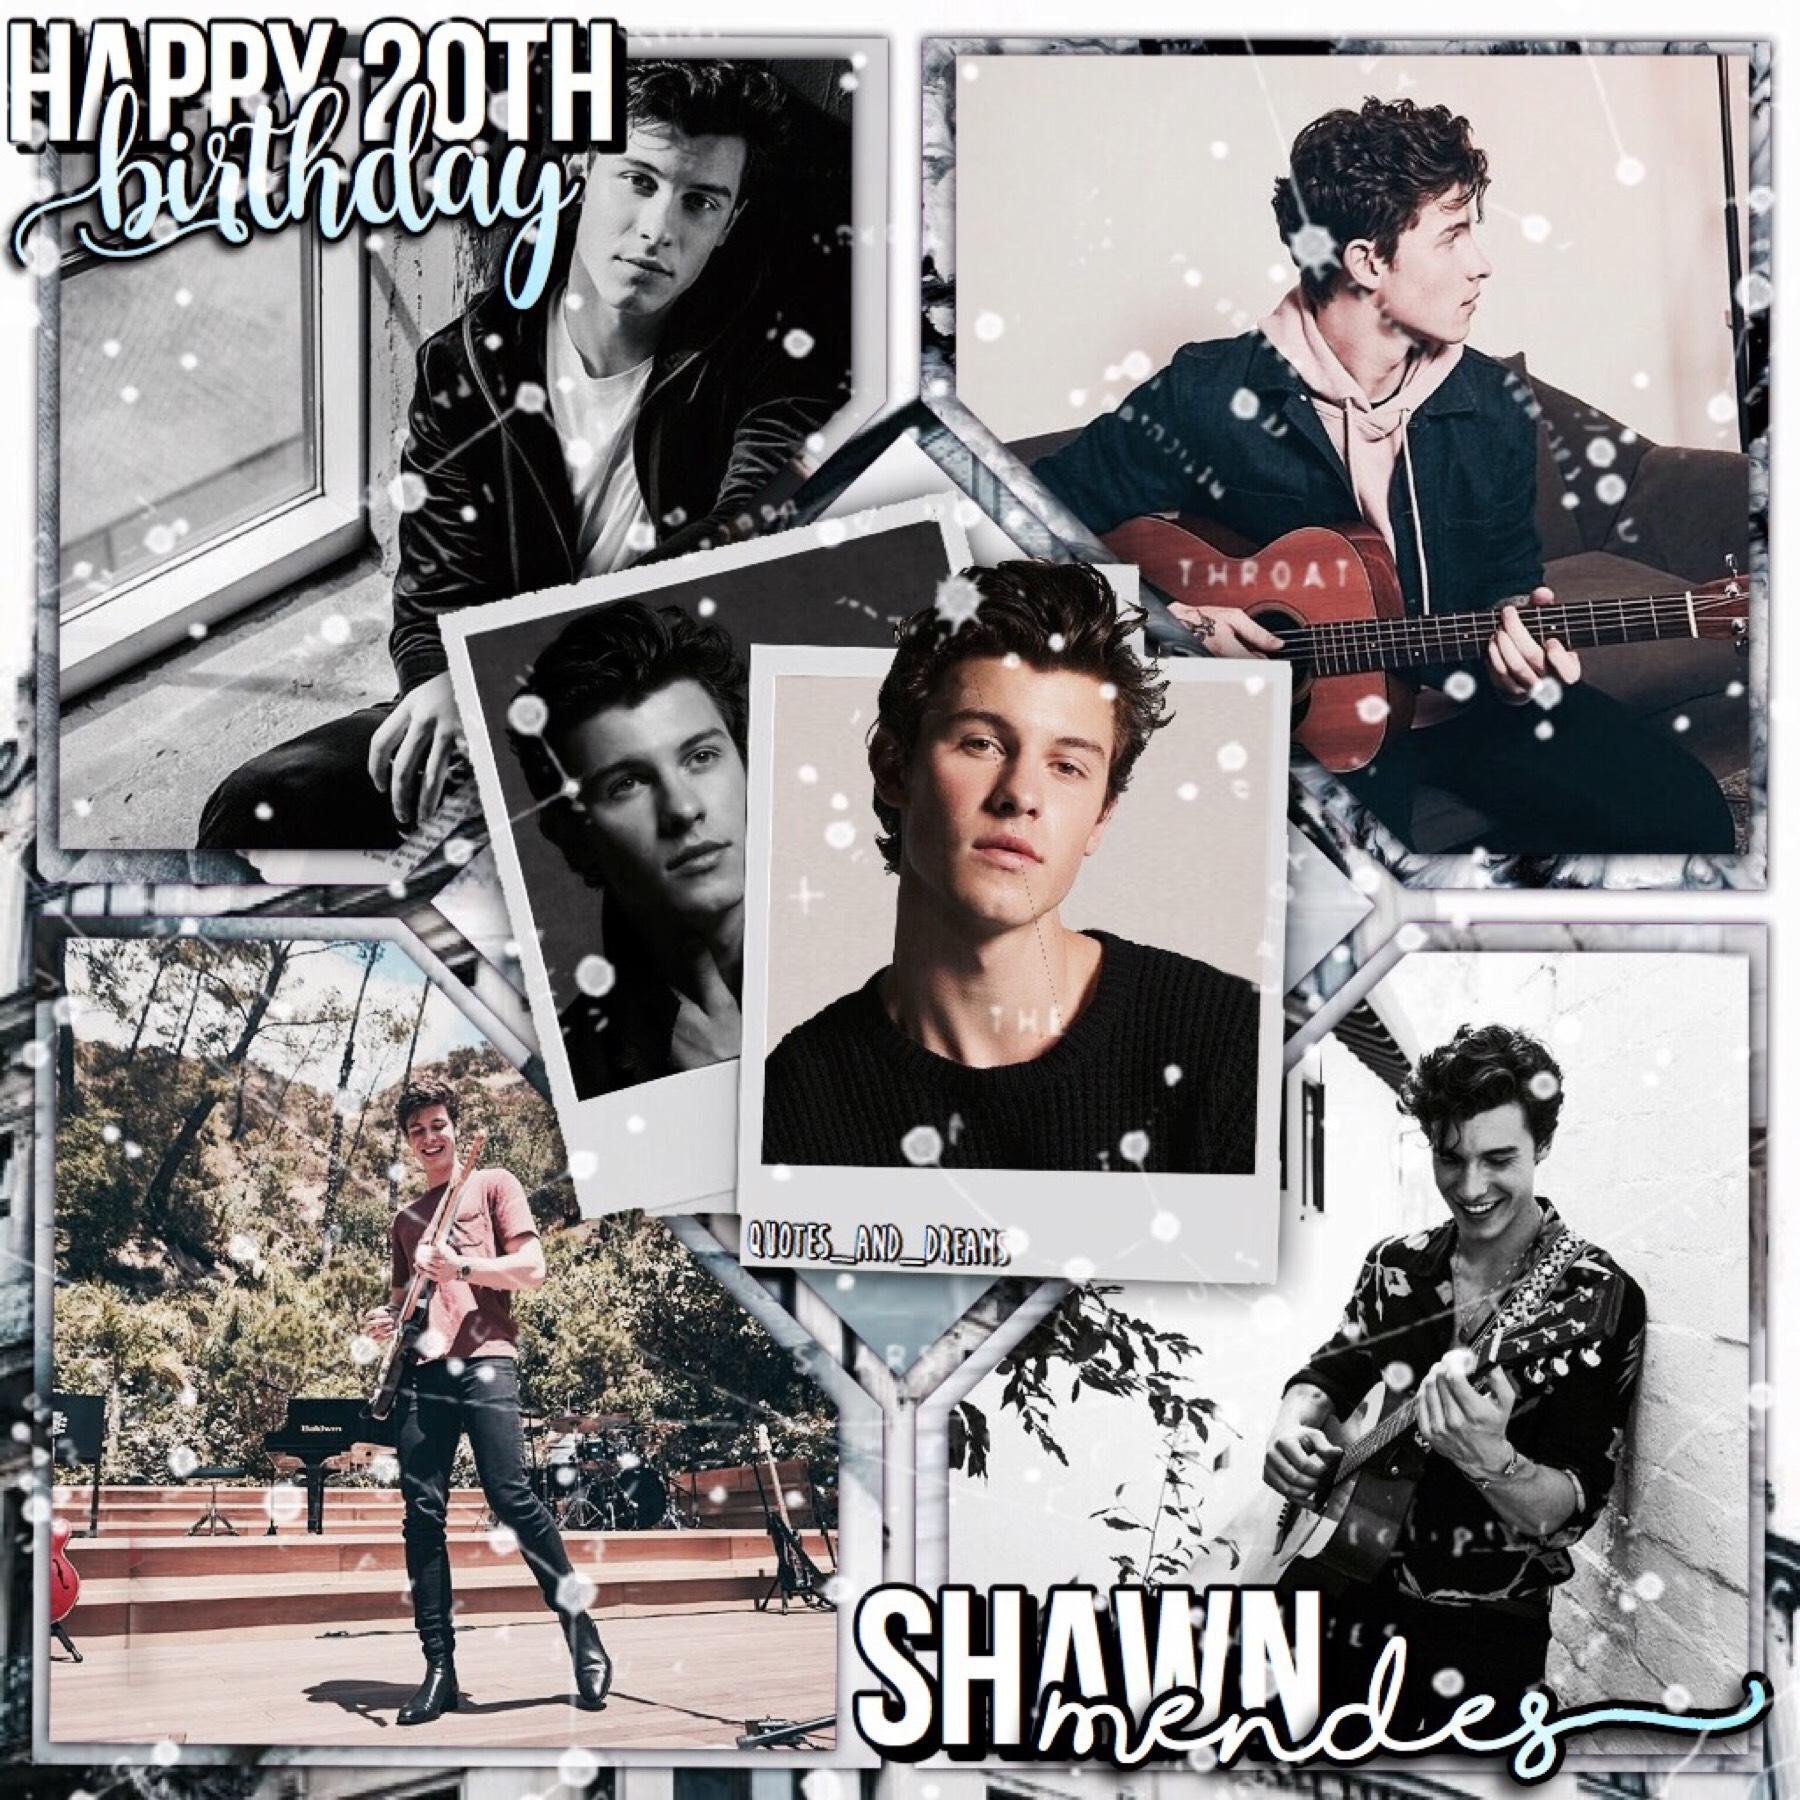 HAPPY BIRTHDAY SHAWN MENDES
I can’t believe you are 20 years old, you have grown up so much these past years. You should be so proud of who you are and what you have accomplished. You are a role model and an idol to many people, including me. You have mad